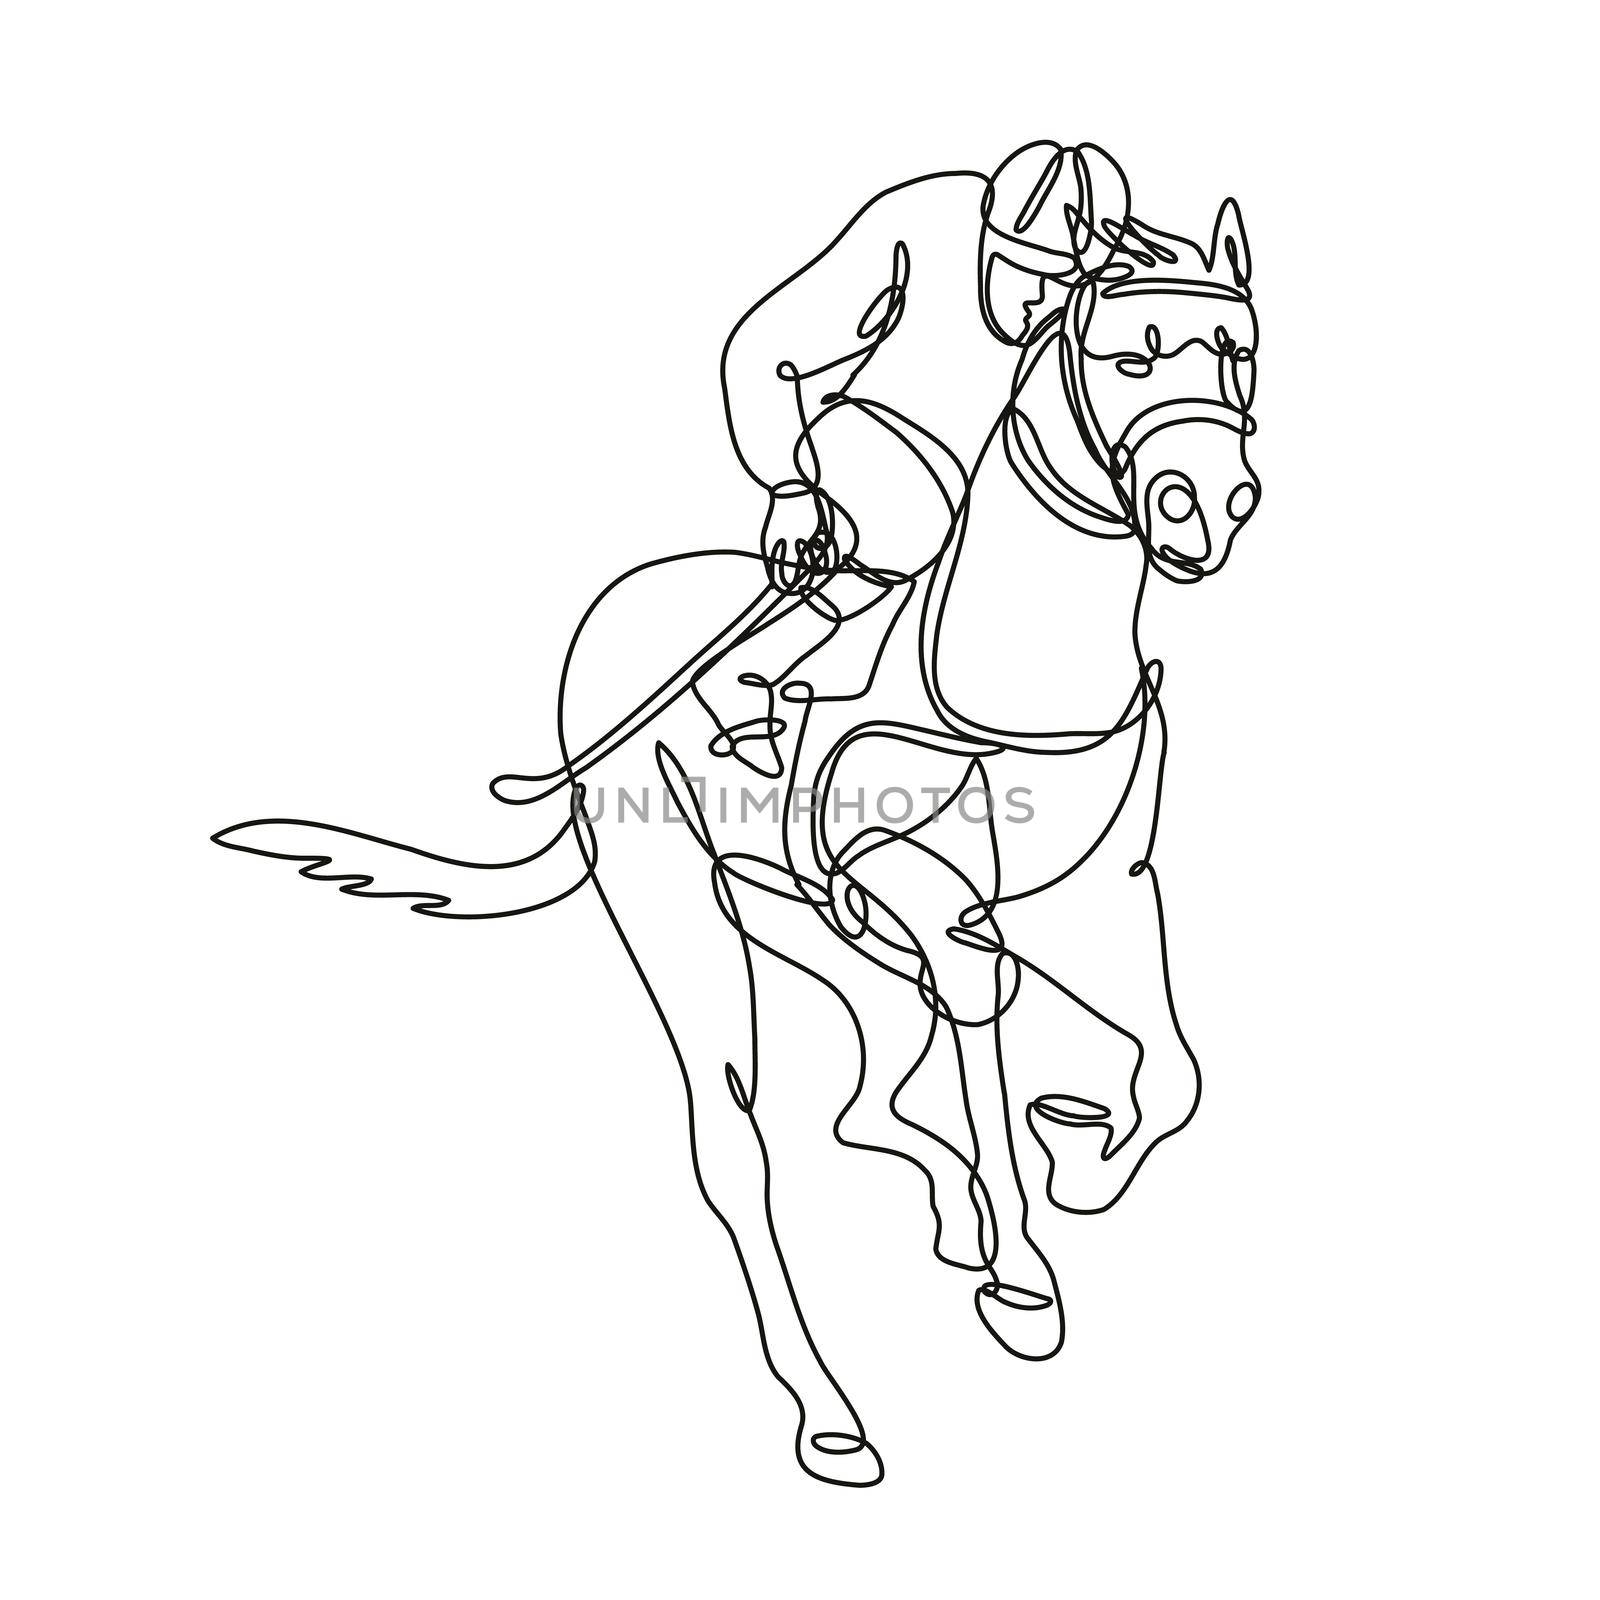 Jockey and Horse Racing Front View Inside Circle Continuous Line Drawing  by patrimonio